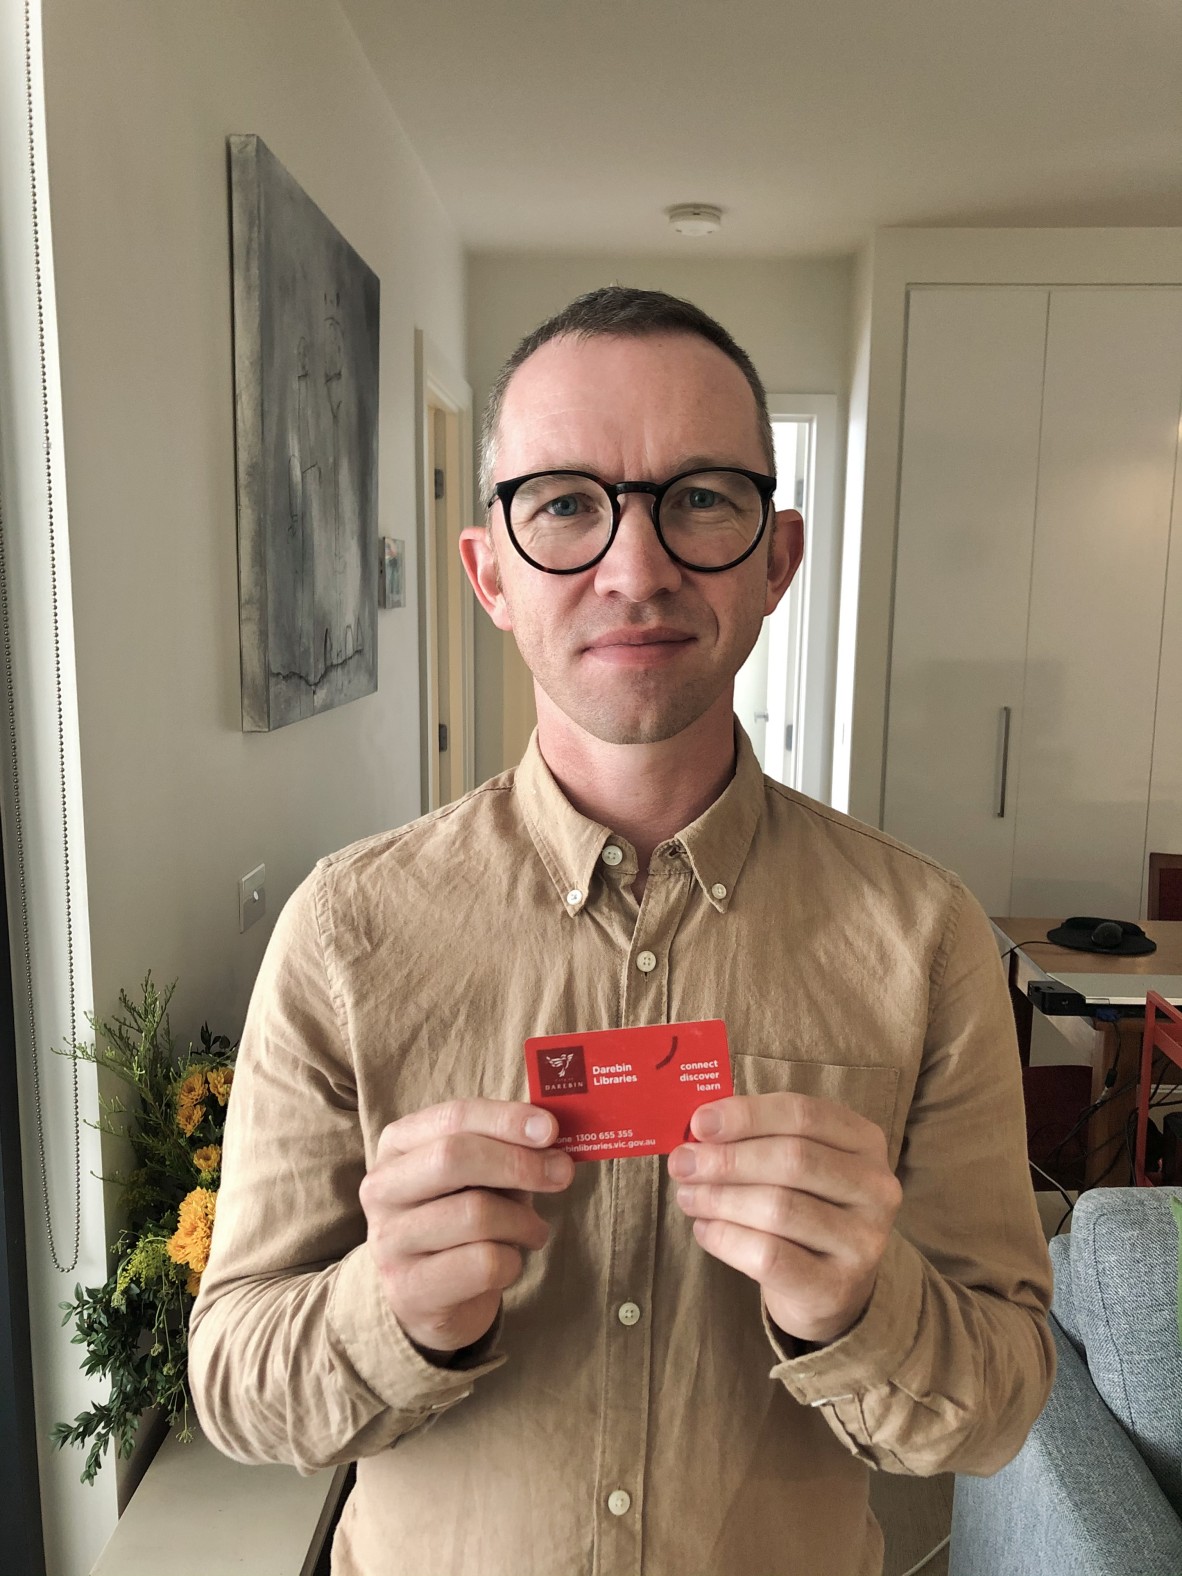 Robert holds up a red library card in the background is a vase of flowers and a couch and table